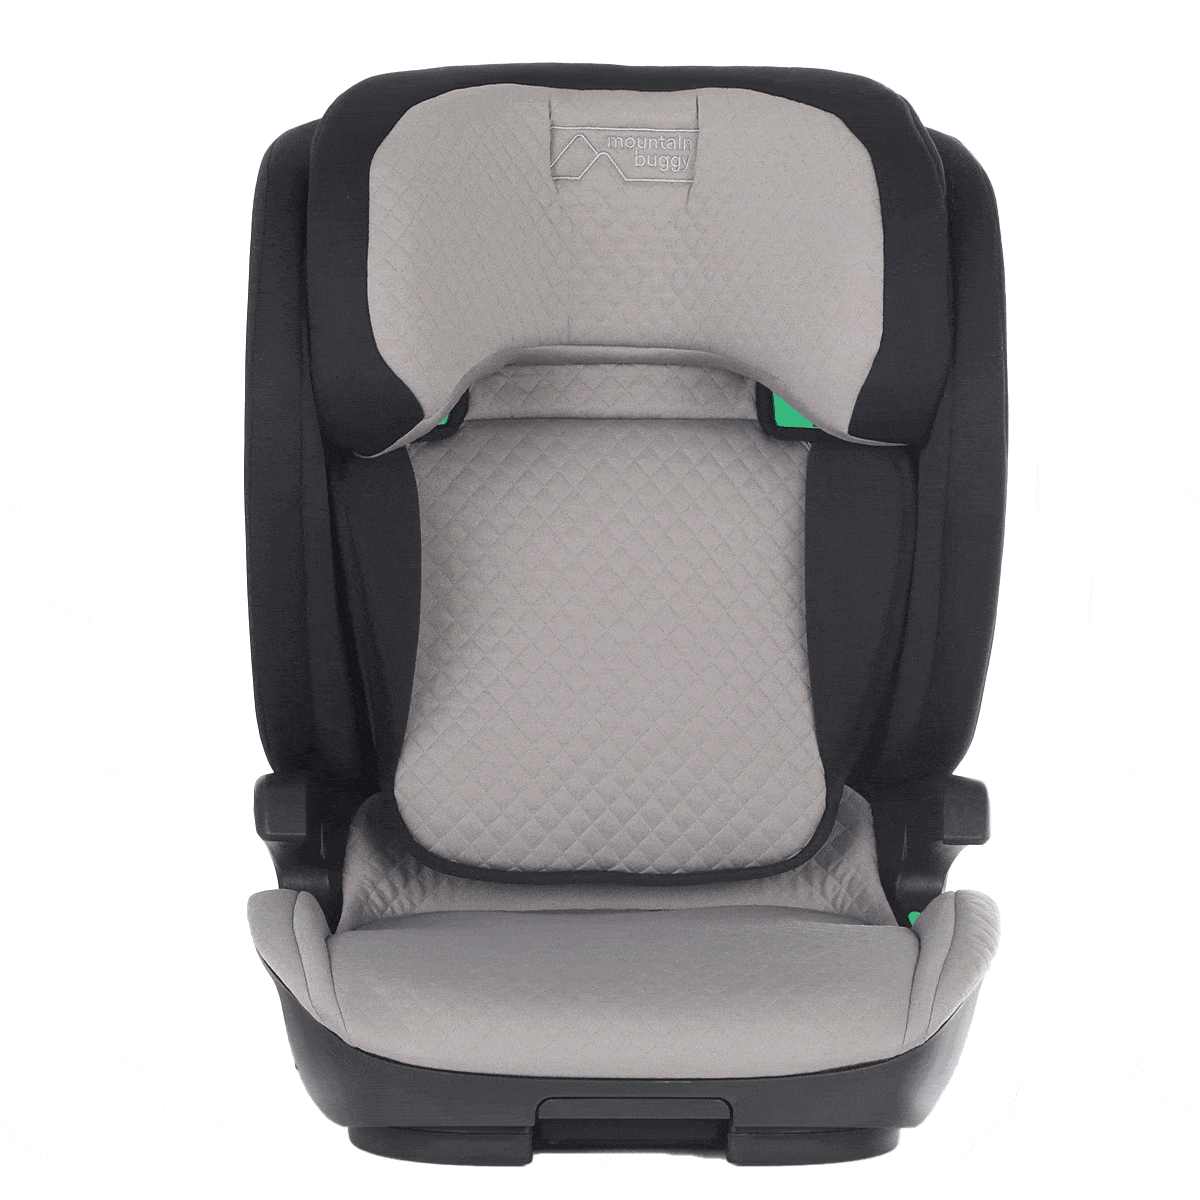 Mountain Buggy haven i-size booster car seat extended width